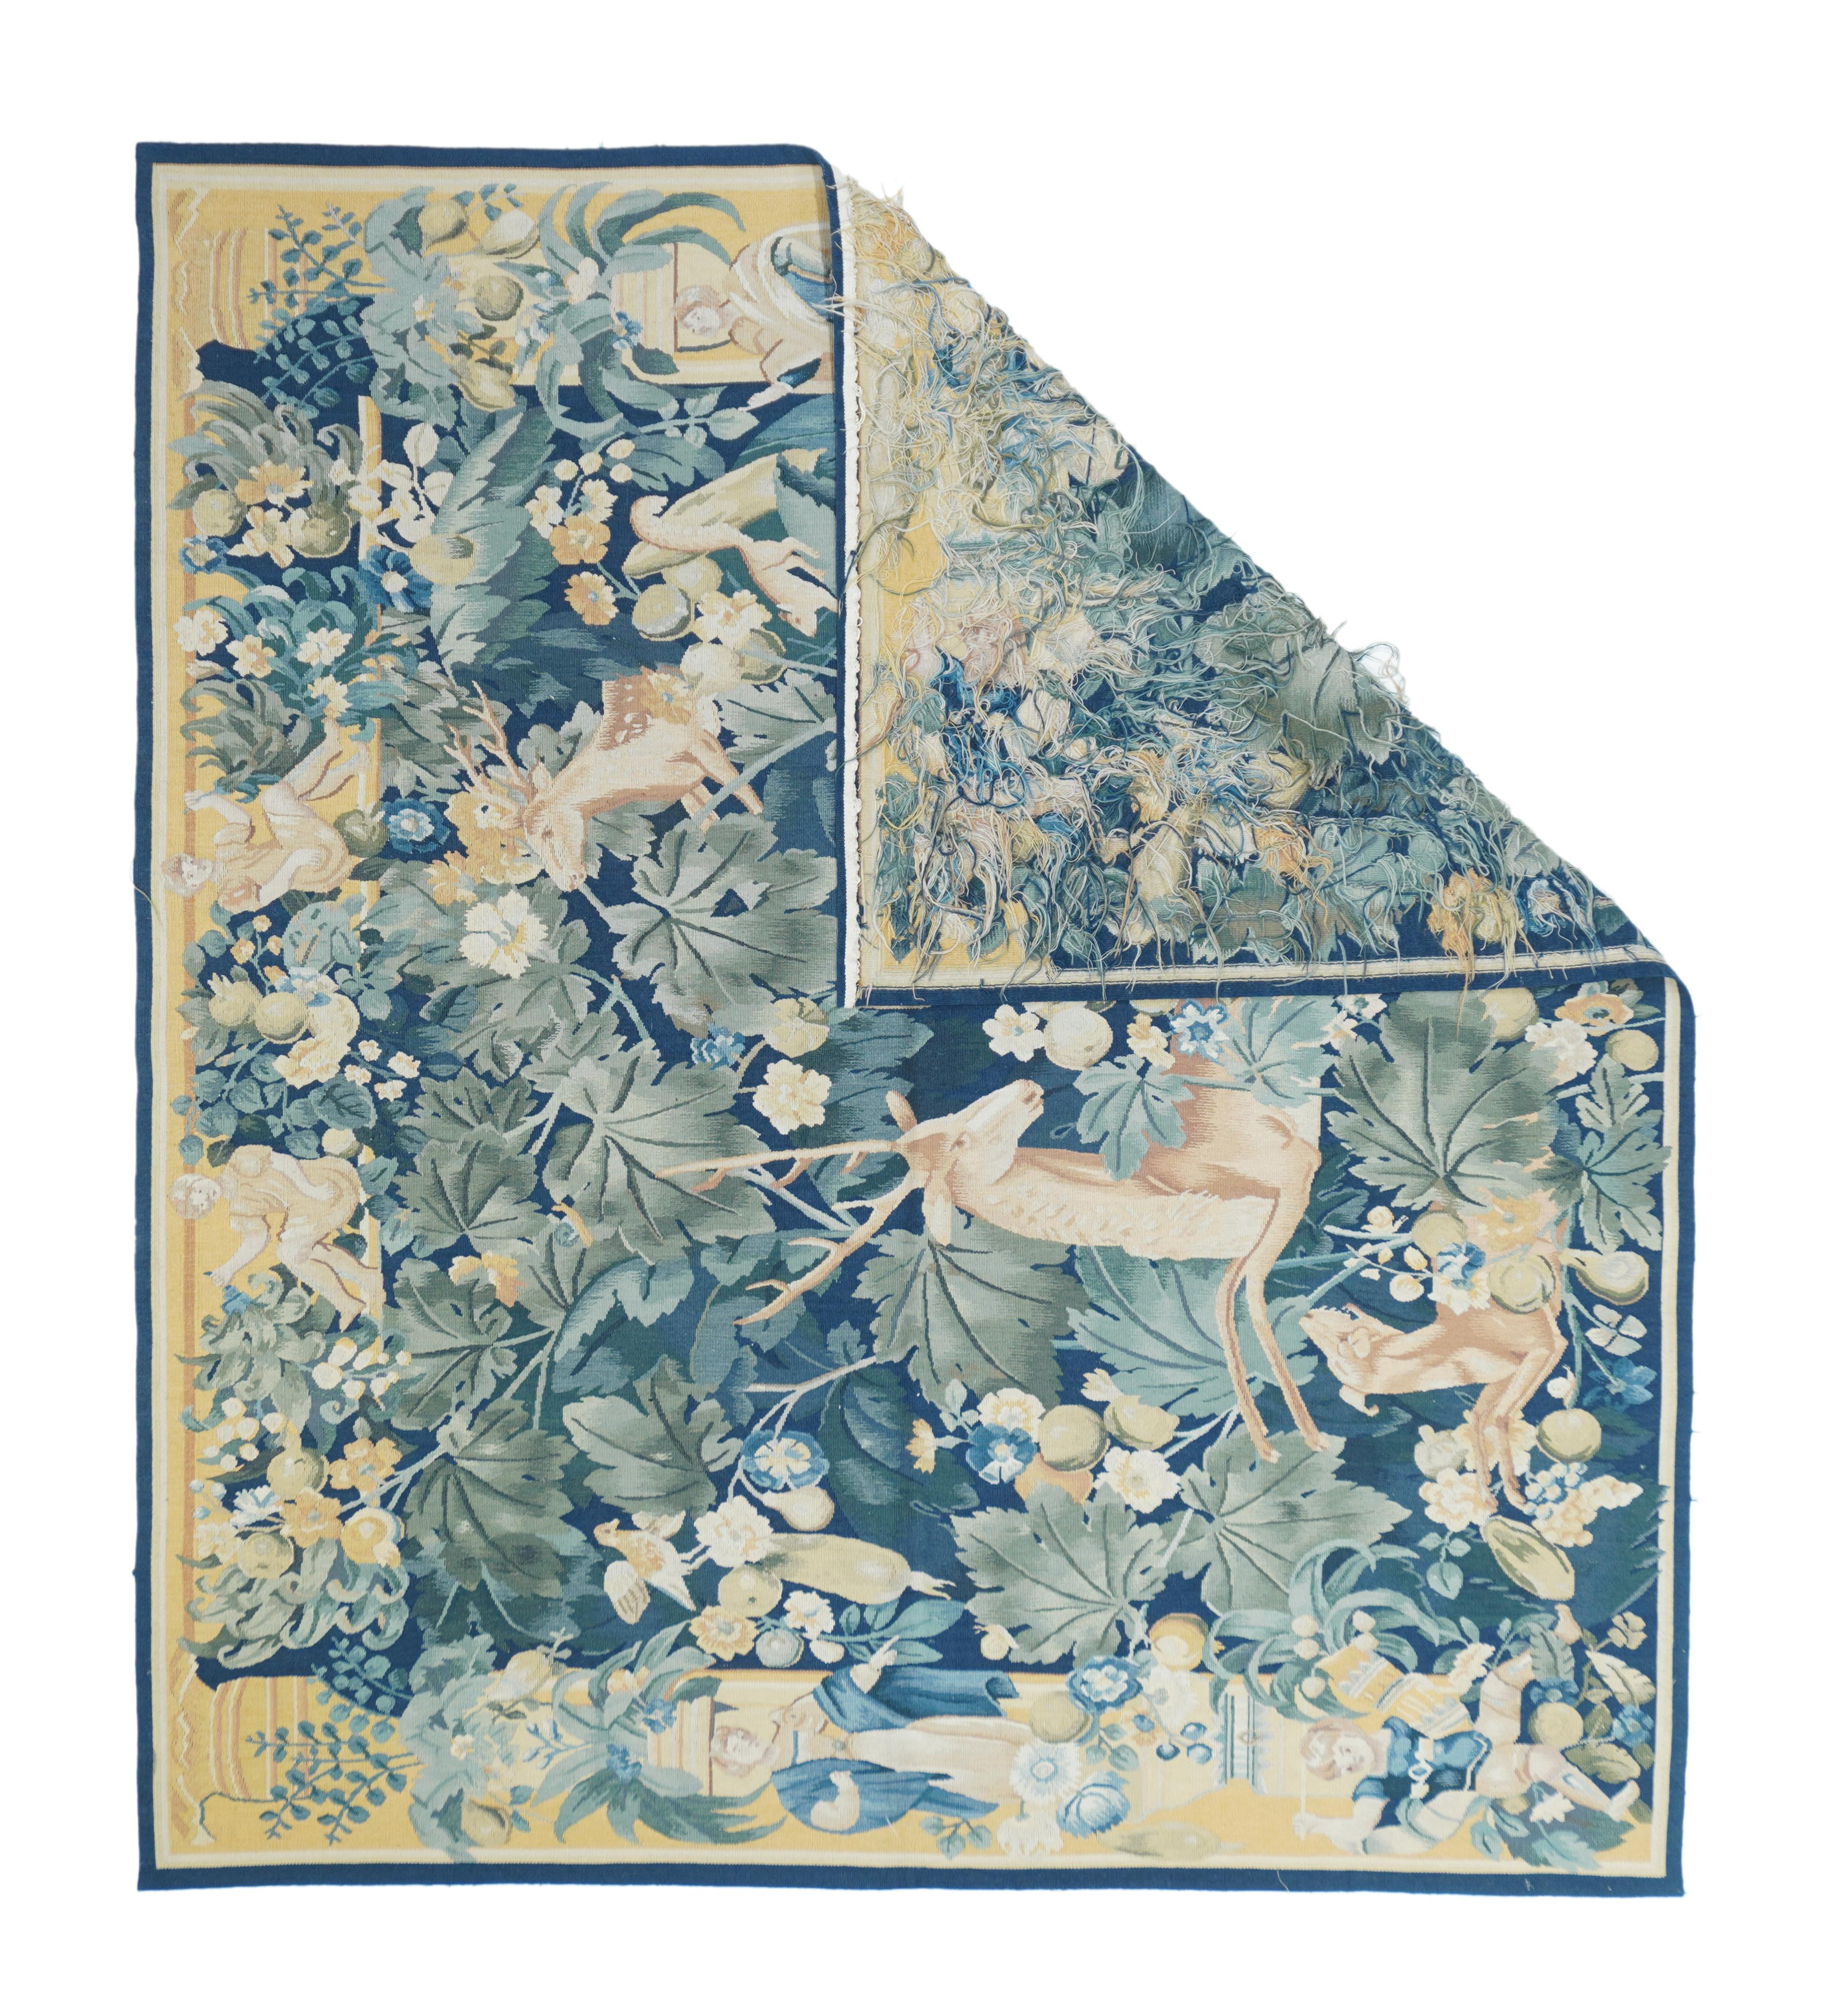 This is a modern interpretation of the Flemish Large Leaf Verdure hangings especially popular in the mid-16th century.
The dark blue ground is nearly covered by lobed grape vine leaves, stems with small flowers and fruits, and a lavishly antlered